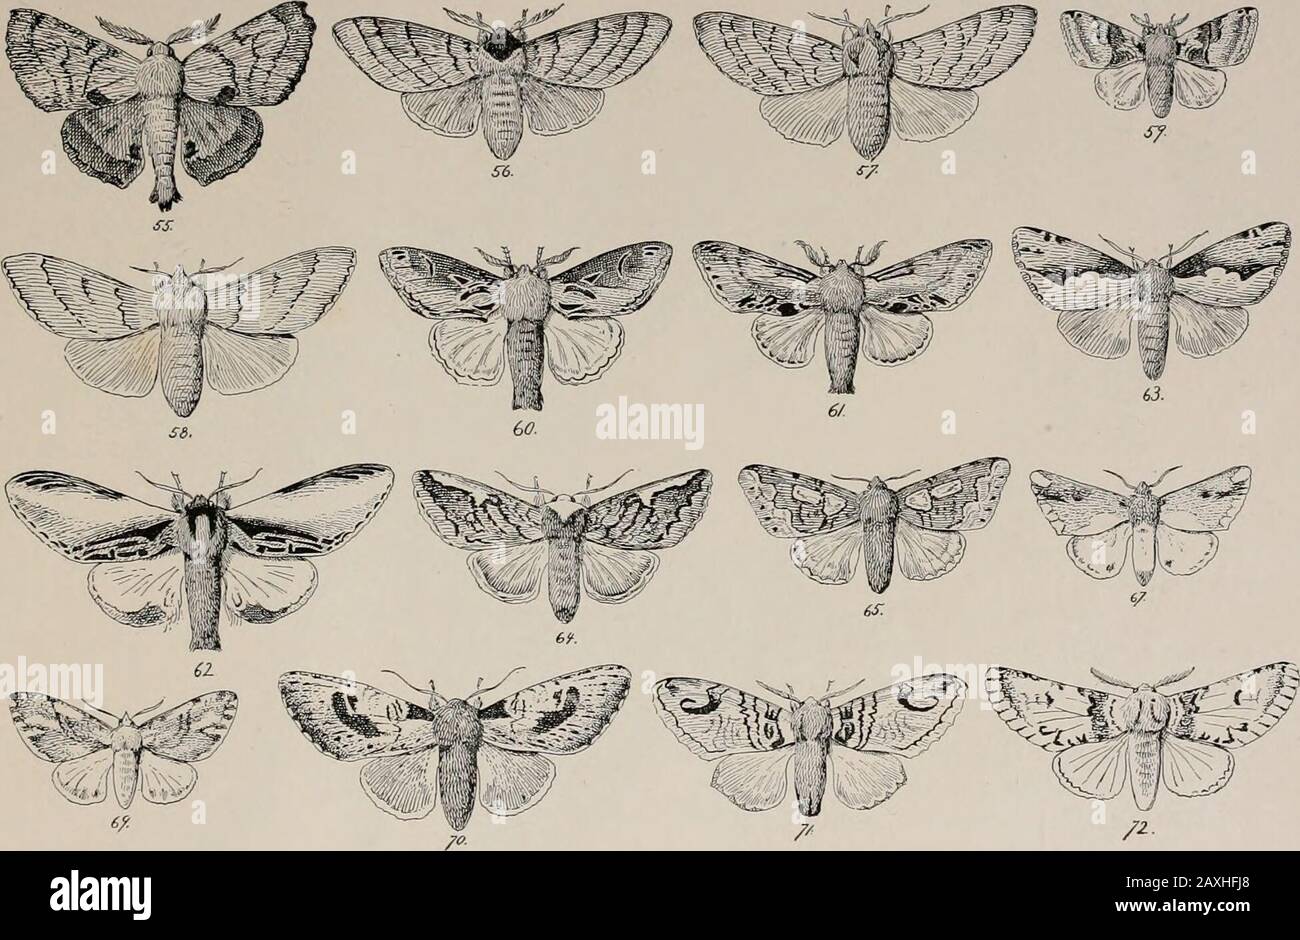 The night moths of New England, how to determine them readily . , gray and brown ; h. buff. c. Elm. 66. (Edemasia eximia ; if in.; like 62, pale. bands on forewing. c. Oak, nut.Nadata gibbosa : 2 in. ; buff with orange shaded ( 67.bands on forewing. c. Oak. badia :  in.; light buff gray with darkerstreaks. Glubhisia trilincala : i i in. ; gray buff and dark marks. c. Willow. Notodonta stragula ; i» in.; f. buff, gray and brown ; h. cream. c. Willow. Lophodonta angulosa ; i J in.; f. gray and brown ; h. light brown. c. Oak. 62. P/icosia rimosa ; 2- in. ; f. white, buff and brown ; h. white. Stock Photo